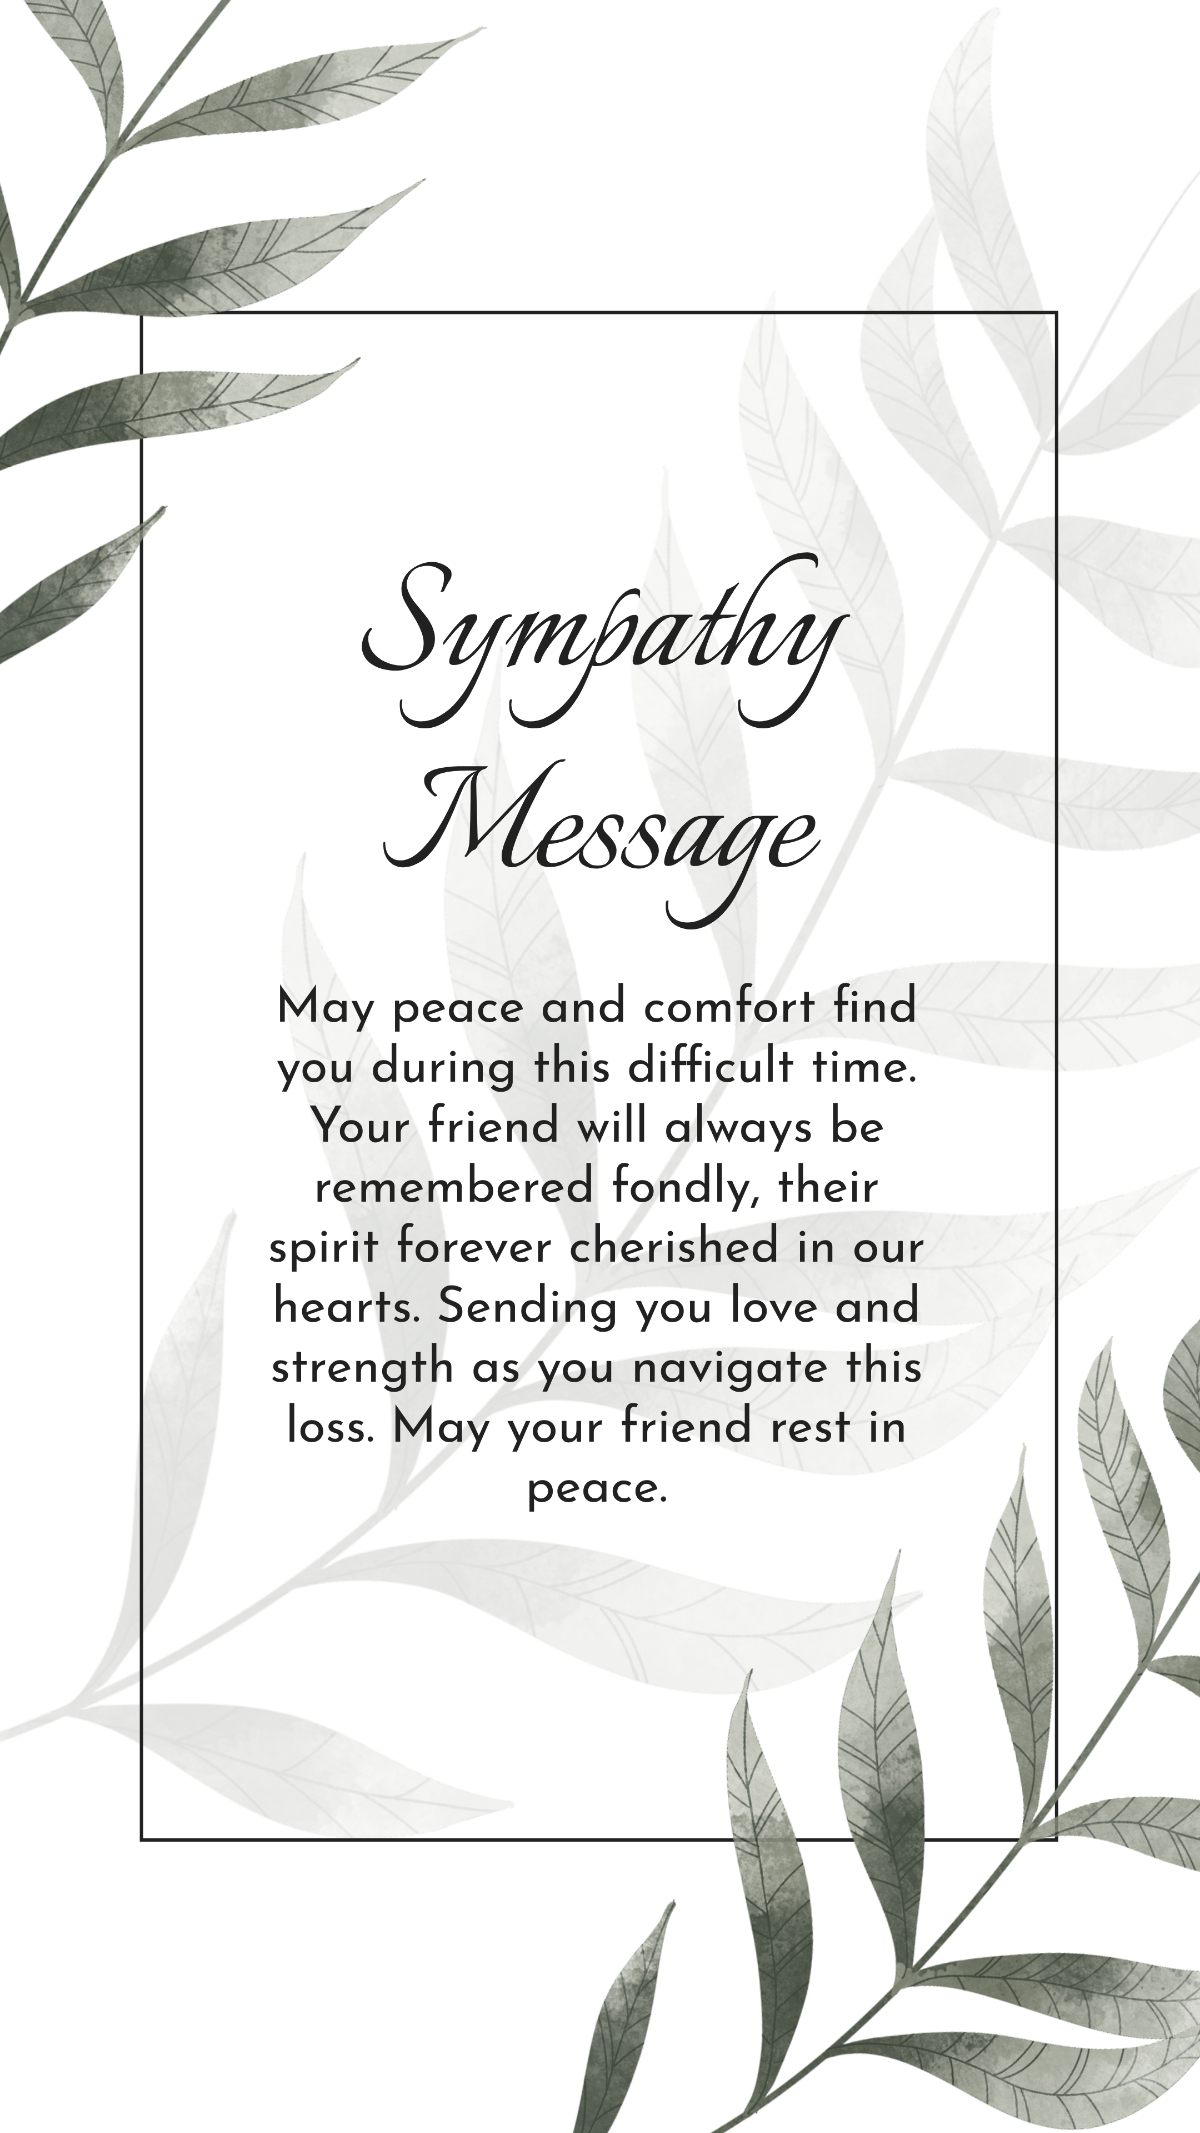 Rest in Peace sympathy message